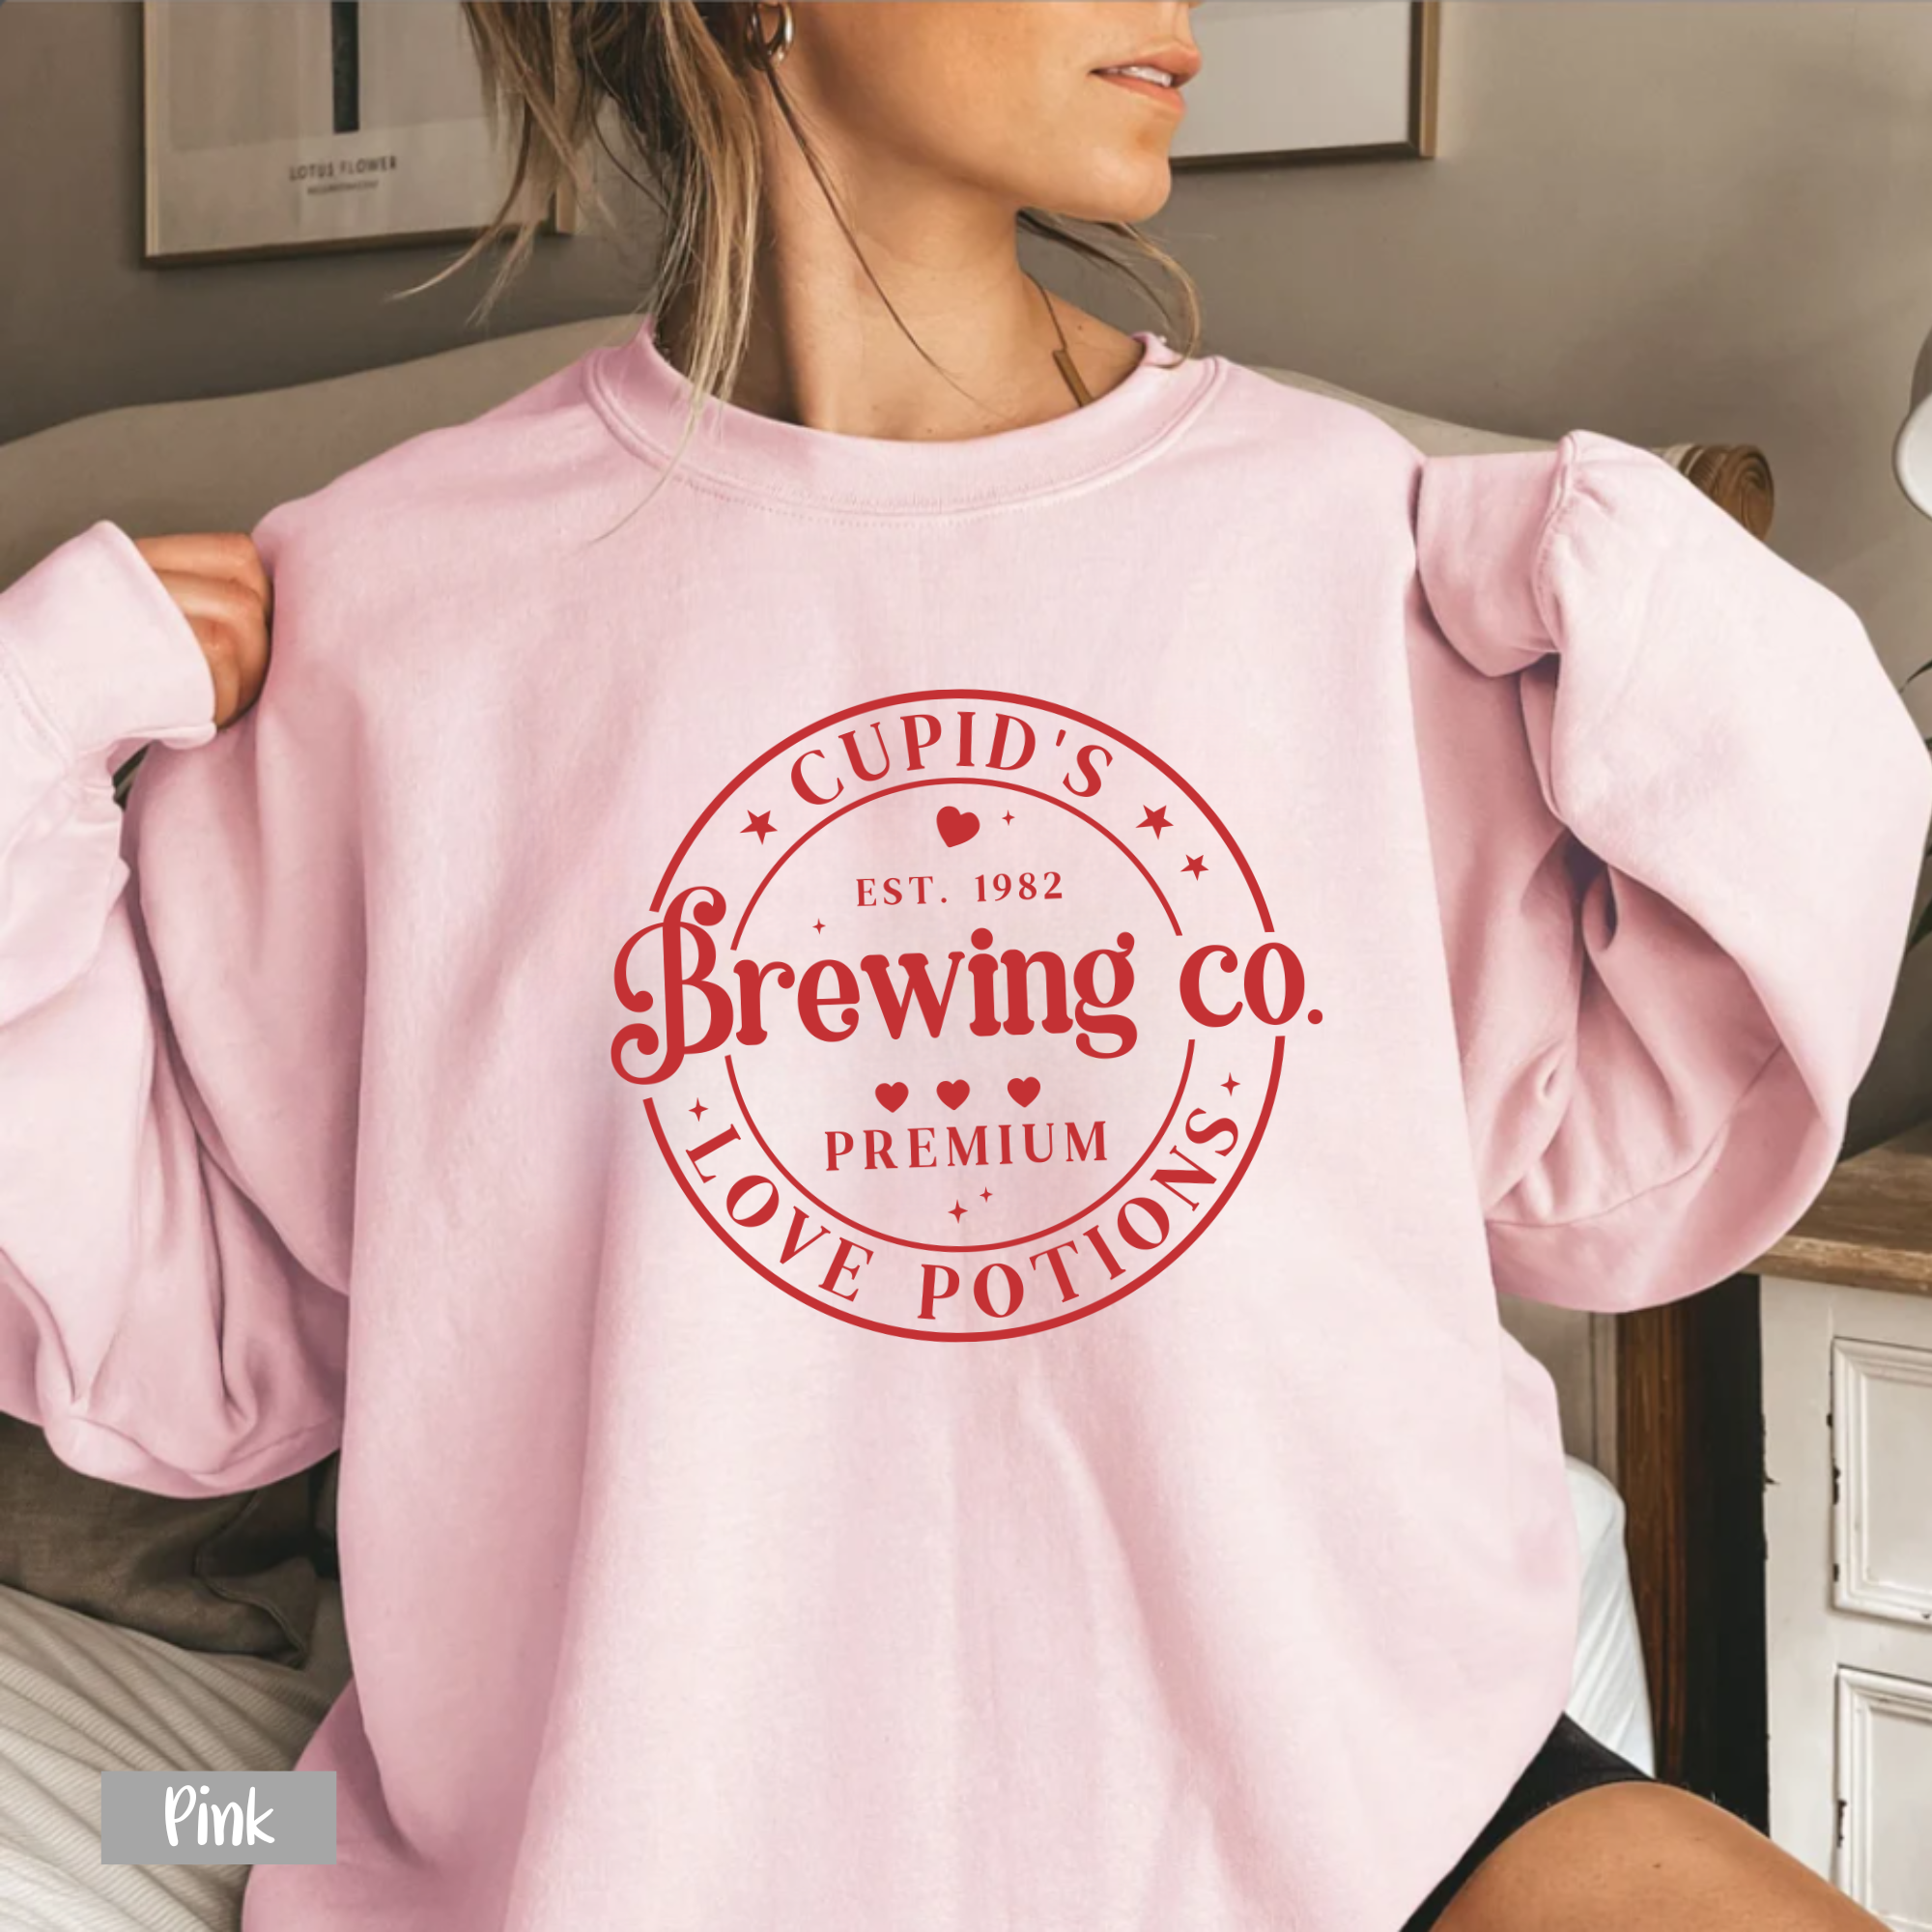 Cupid's Brewing Co Premium Love Potions Shirt - Valentine Gift